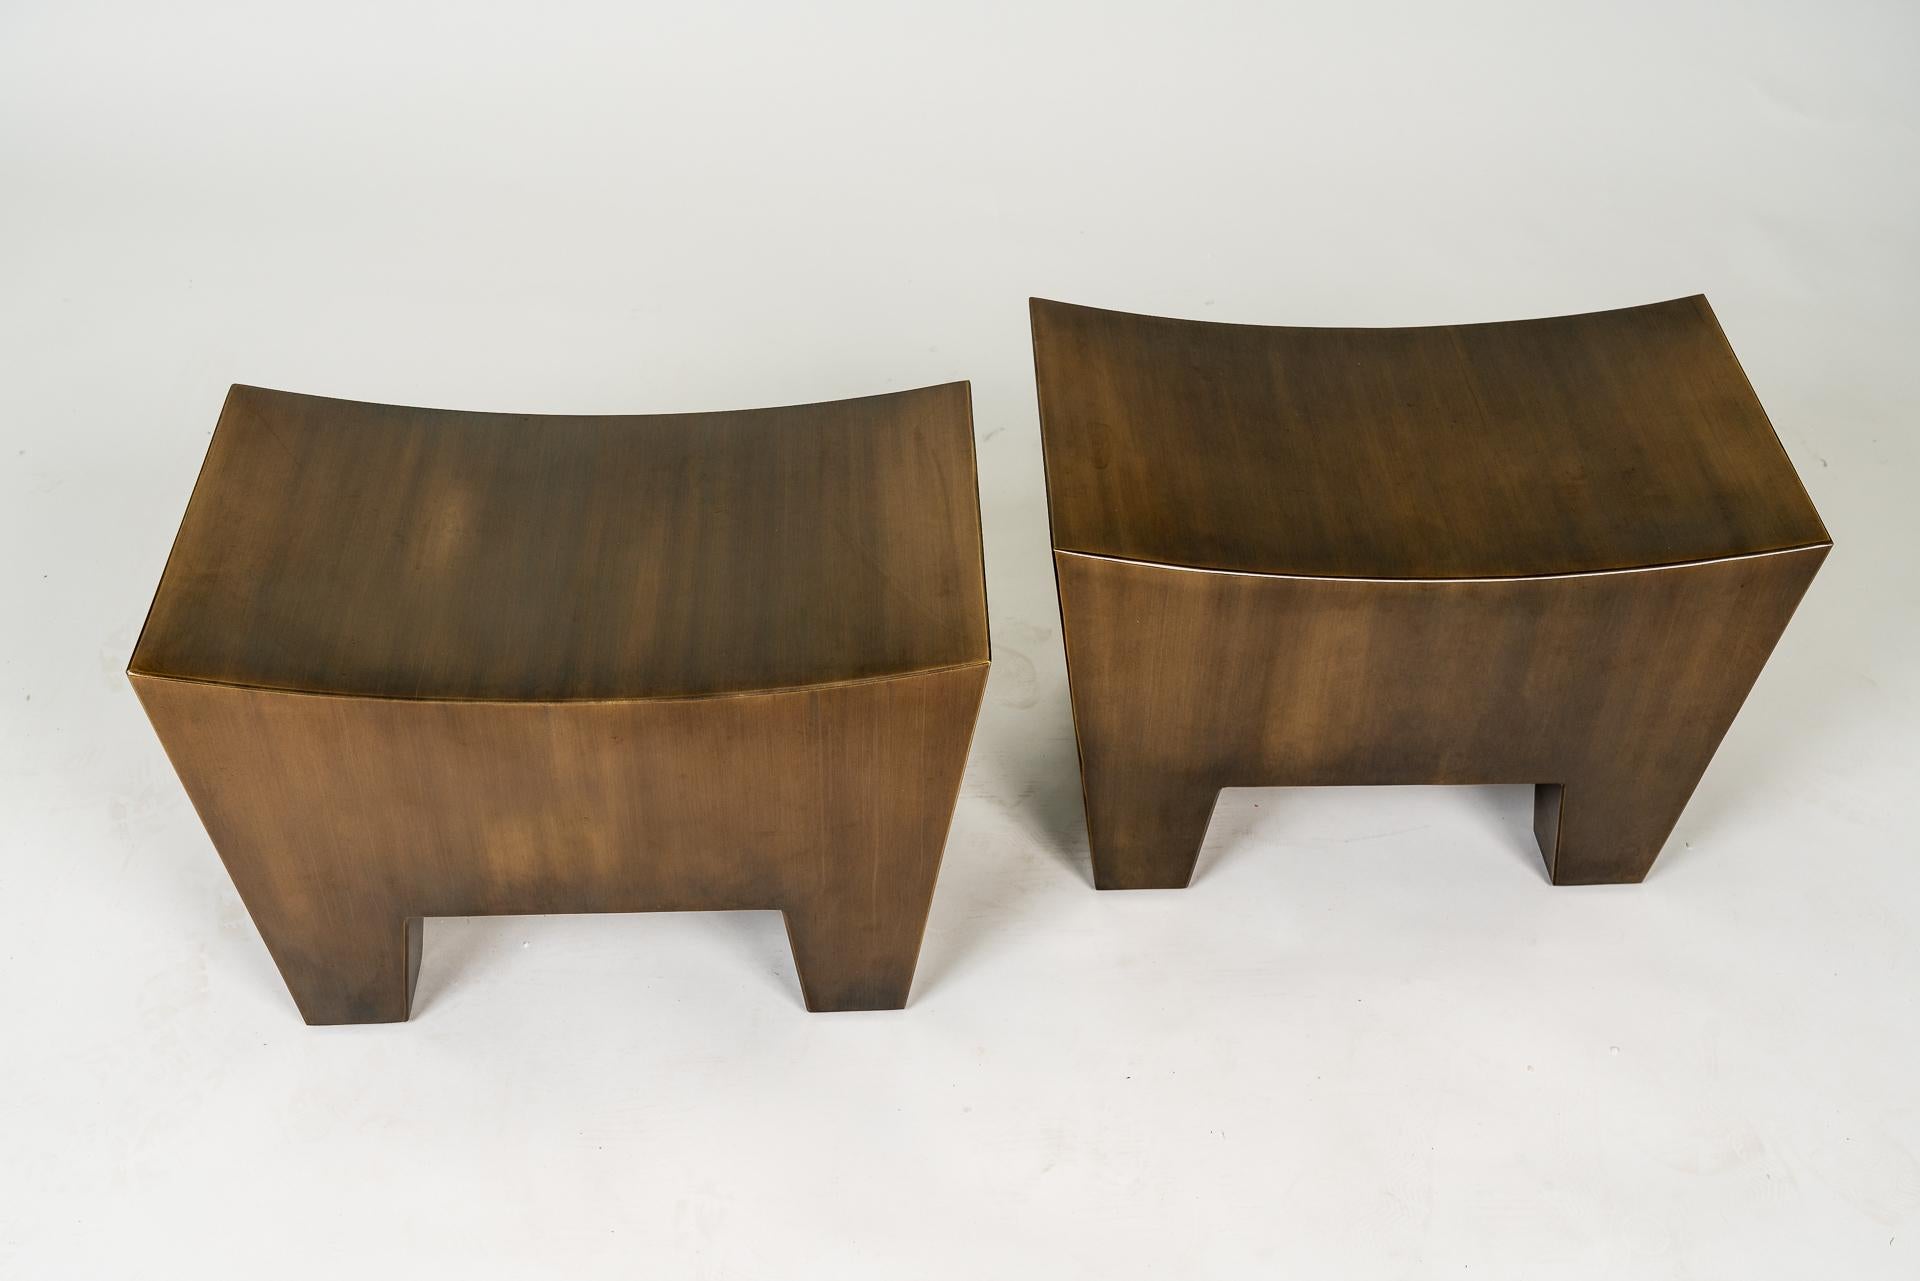 Beautiful pair of bronze stools from the manufacture Promemoria from Italy.
The design of these stools is particularly beautiful, with a curved seat that tapers off at the feet. The processing of the material is perfect. A really beautiful pair